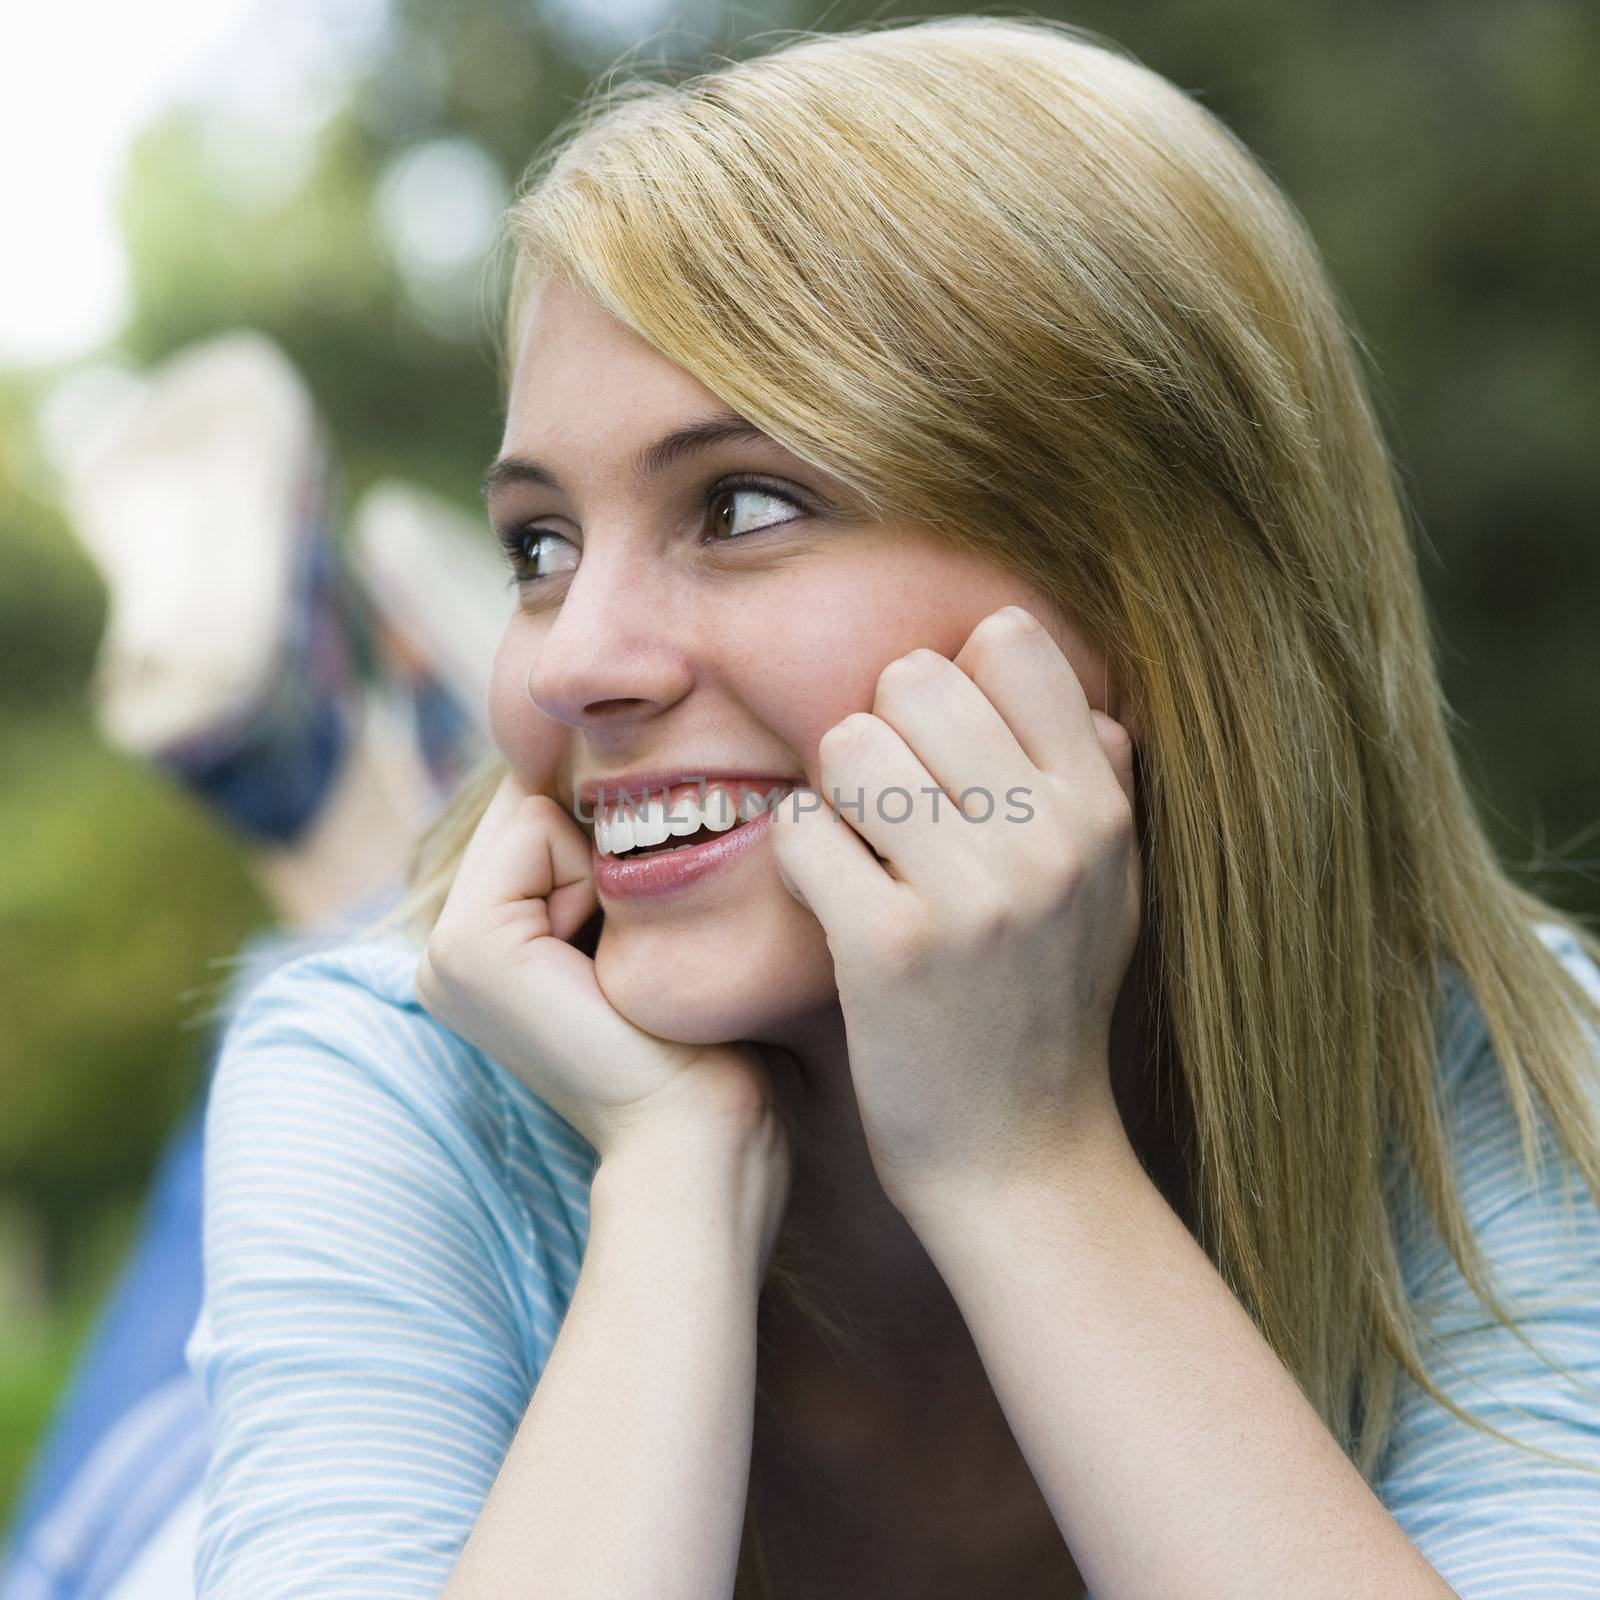 Smiling Teen Girl Resting head on Her Hands Looking Away From Camera